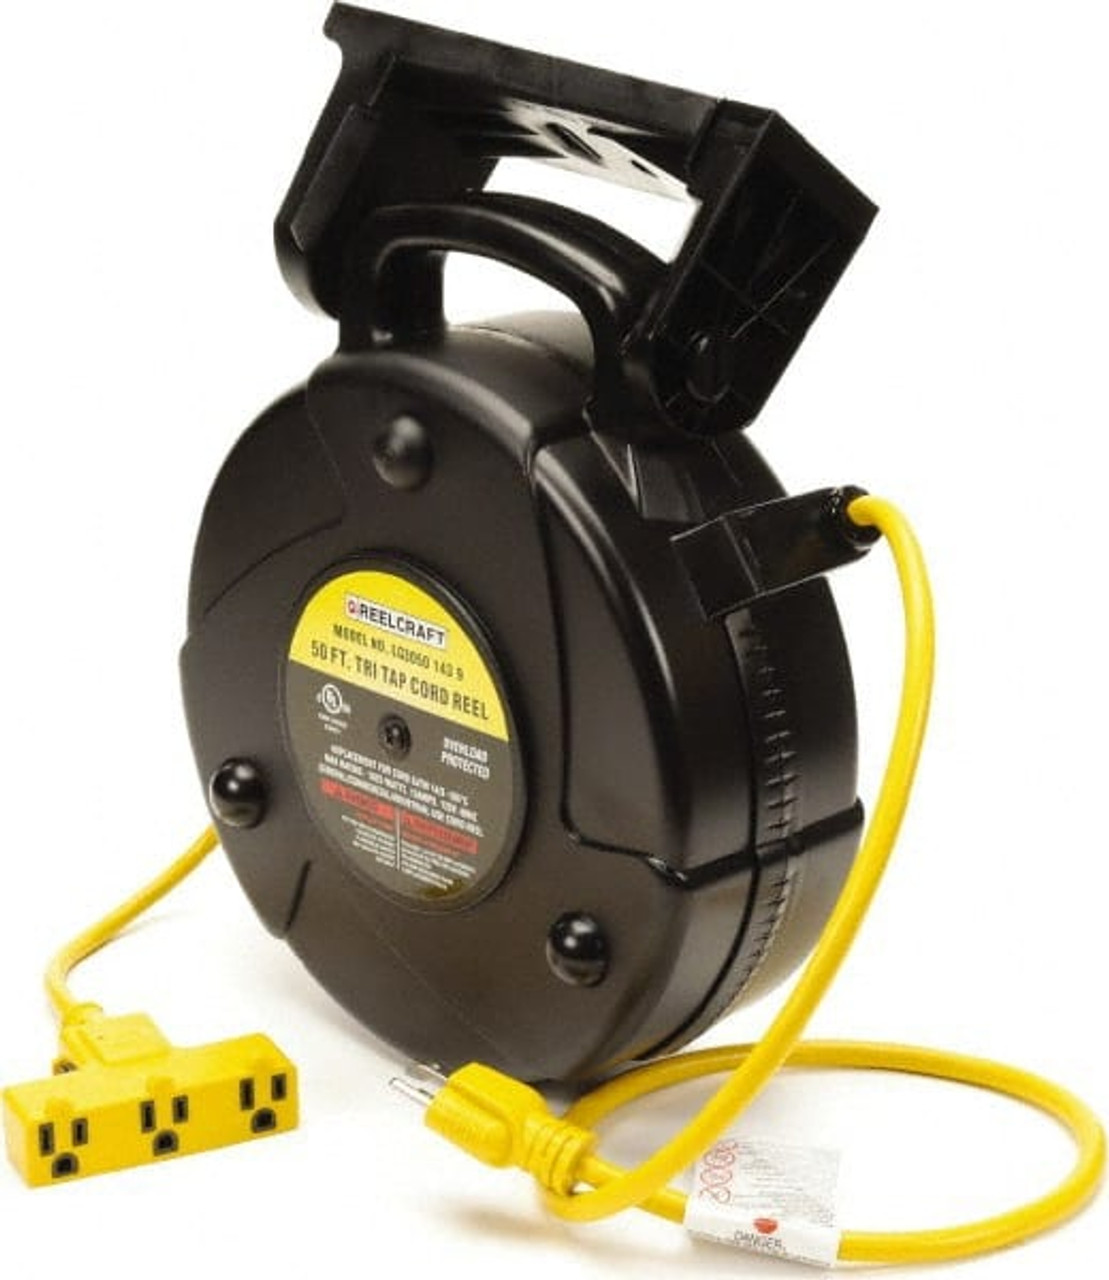 Buy cable reel 50 Online in Antigua and Barbuda at Low Prices at desertcart